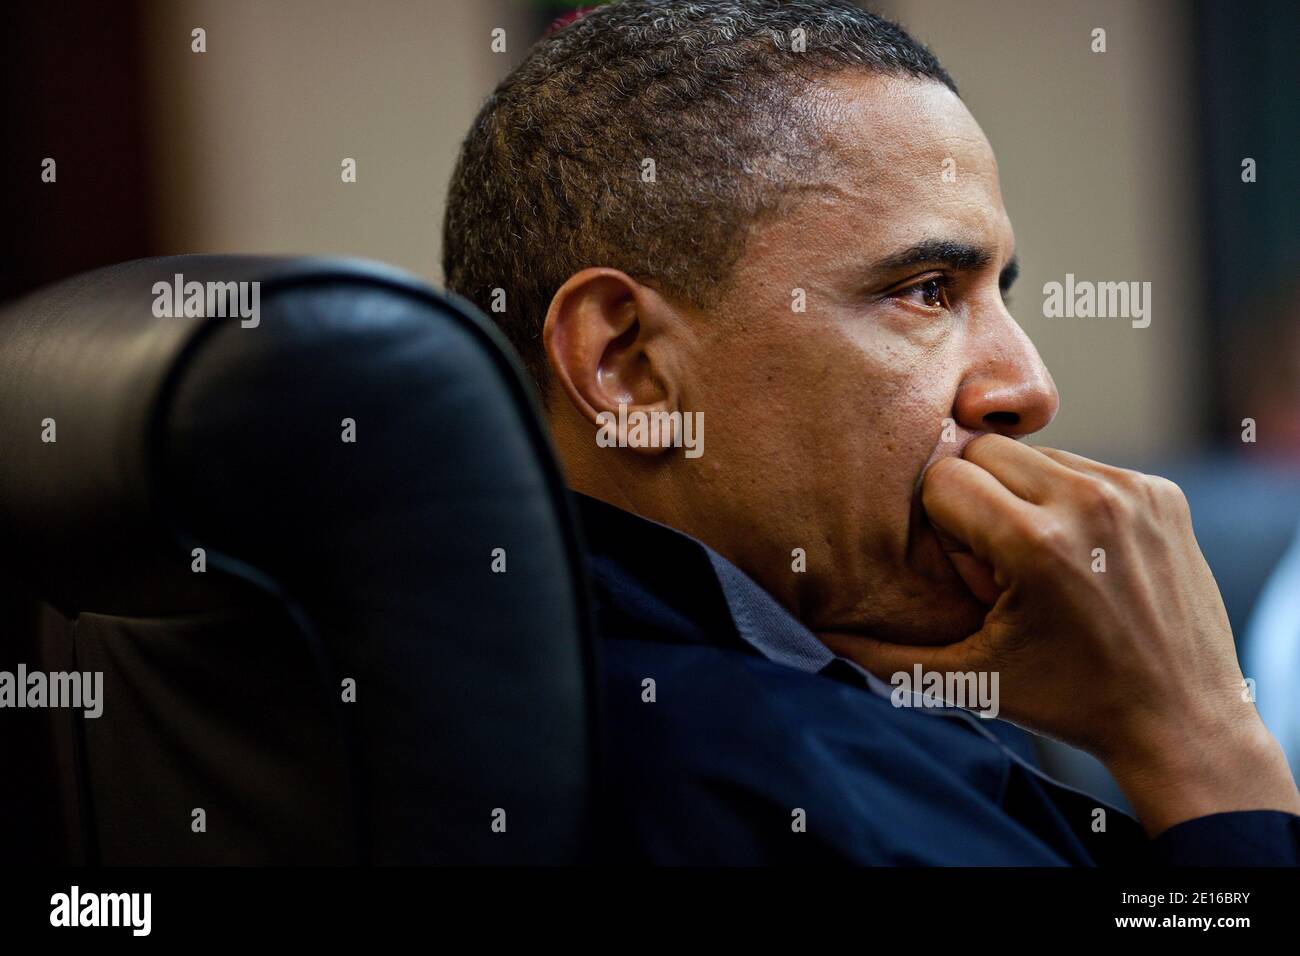 US President Barack Obama listens during one in a series of meetings discussing the mission against Osama bin Laden, in the Situation Room of the White House, May 1, 2011. Photo by Pete Souza/ White House via ABACAPRESS.COM Stock Photo